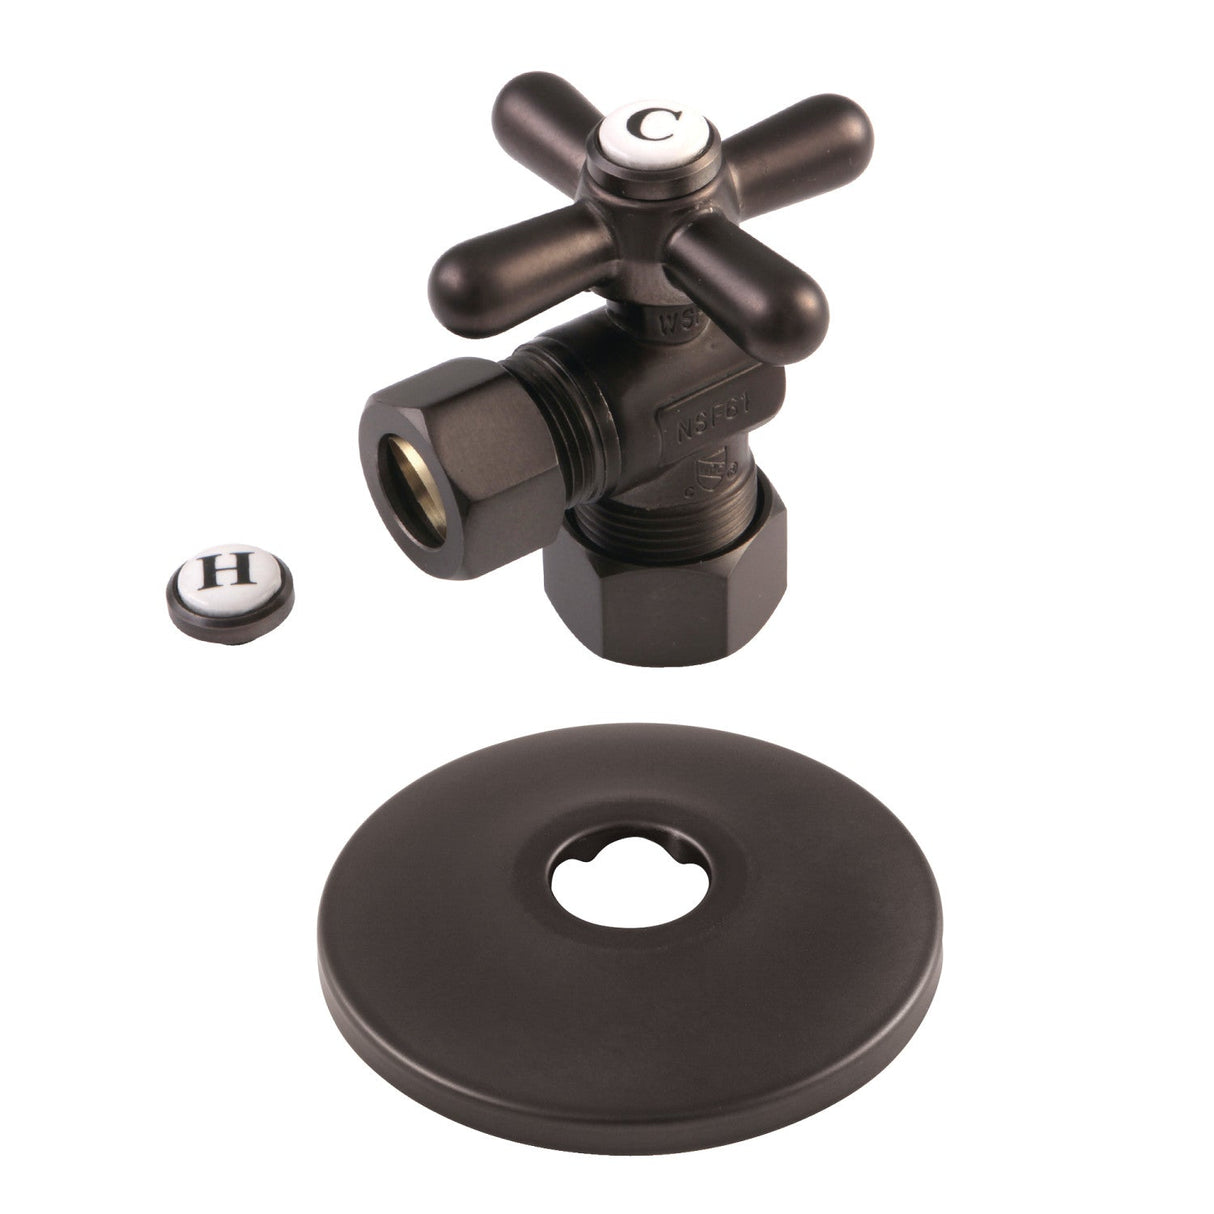 CC54405XK 5/8-Inch OD Comp x 1/2-Inch OD Comp Quarter-Turn Angle Stop Valve with Flange, Oil Rubbed Bronze